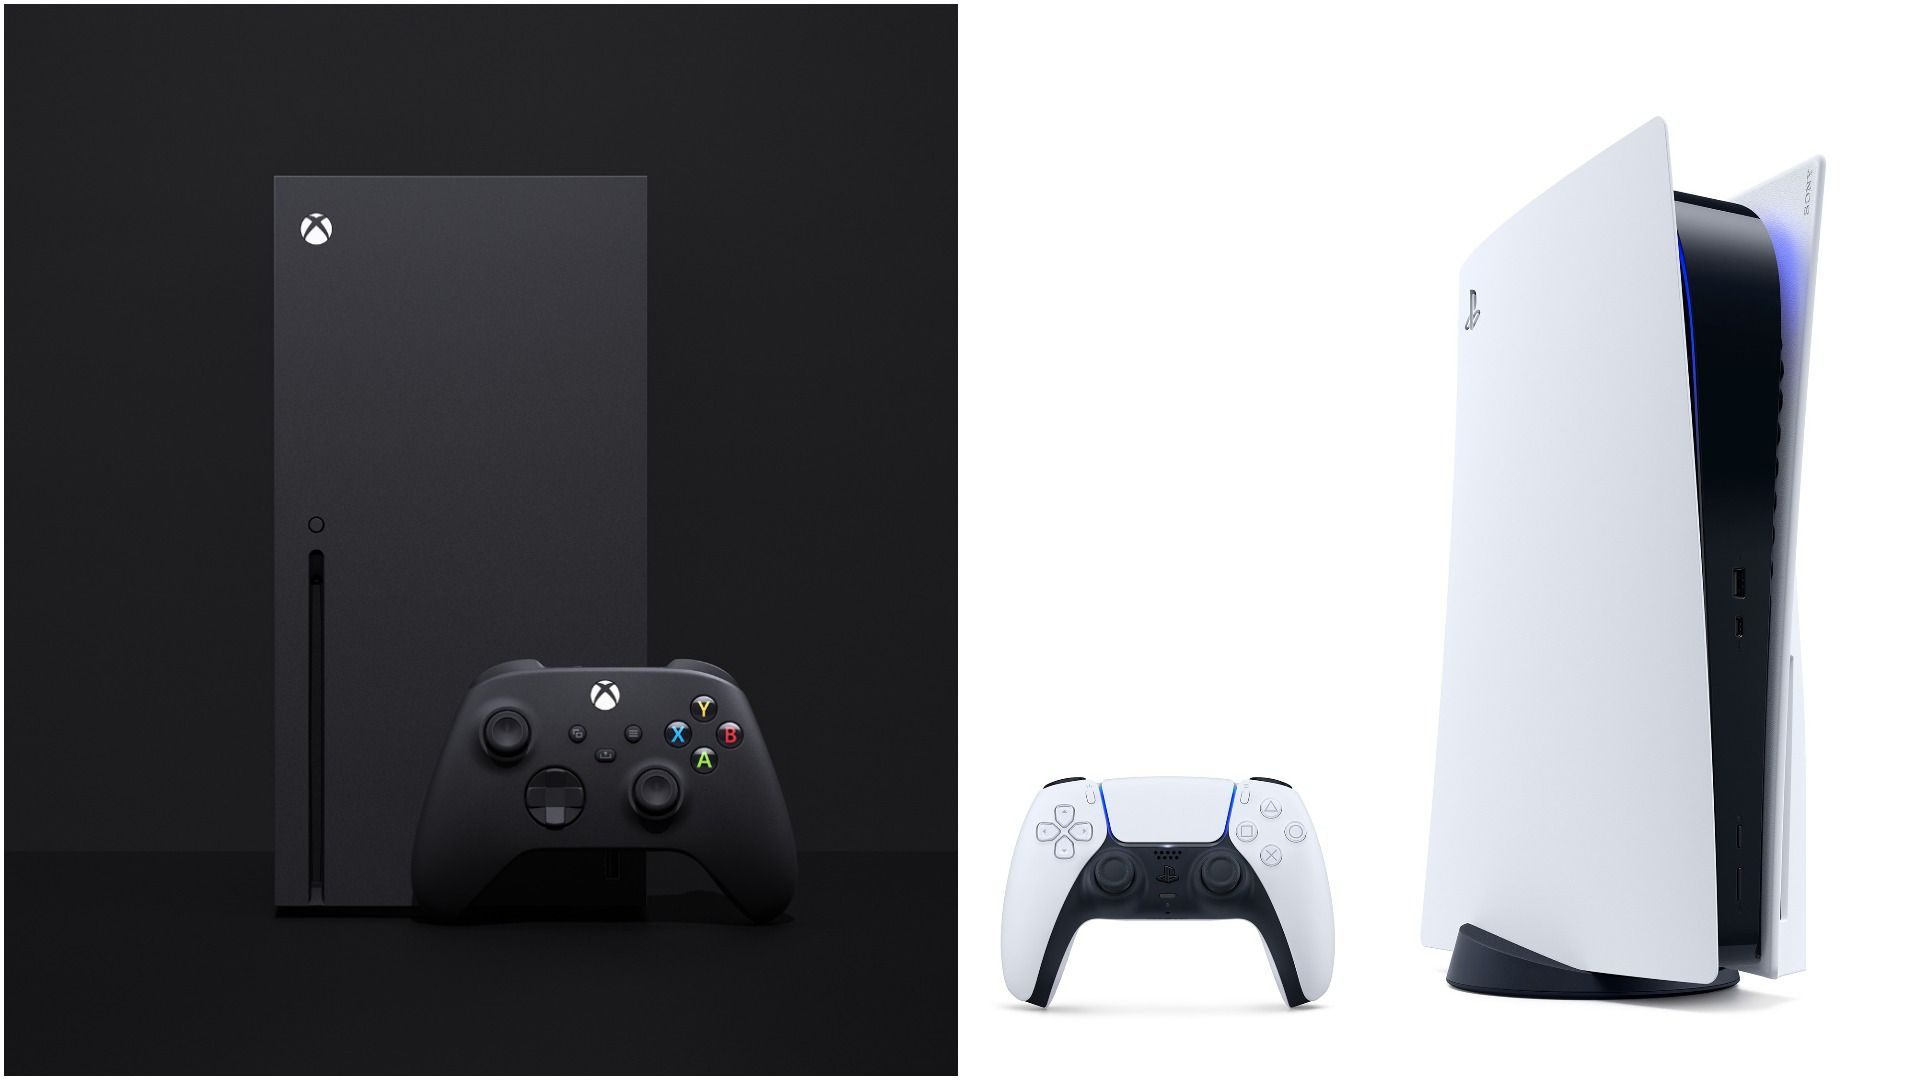 Xbox Series X vs. PlayStation 5: Which Console Is More Powerful